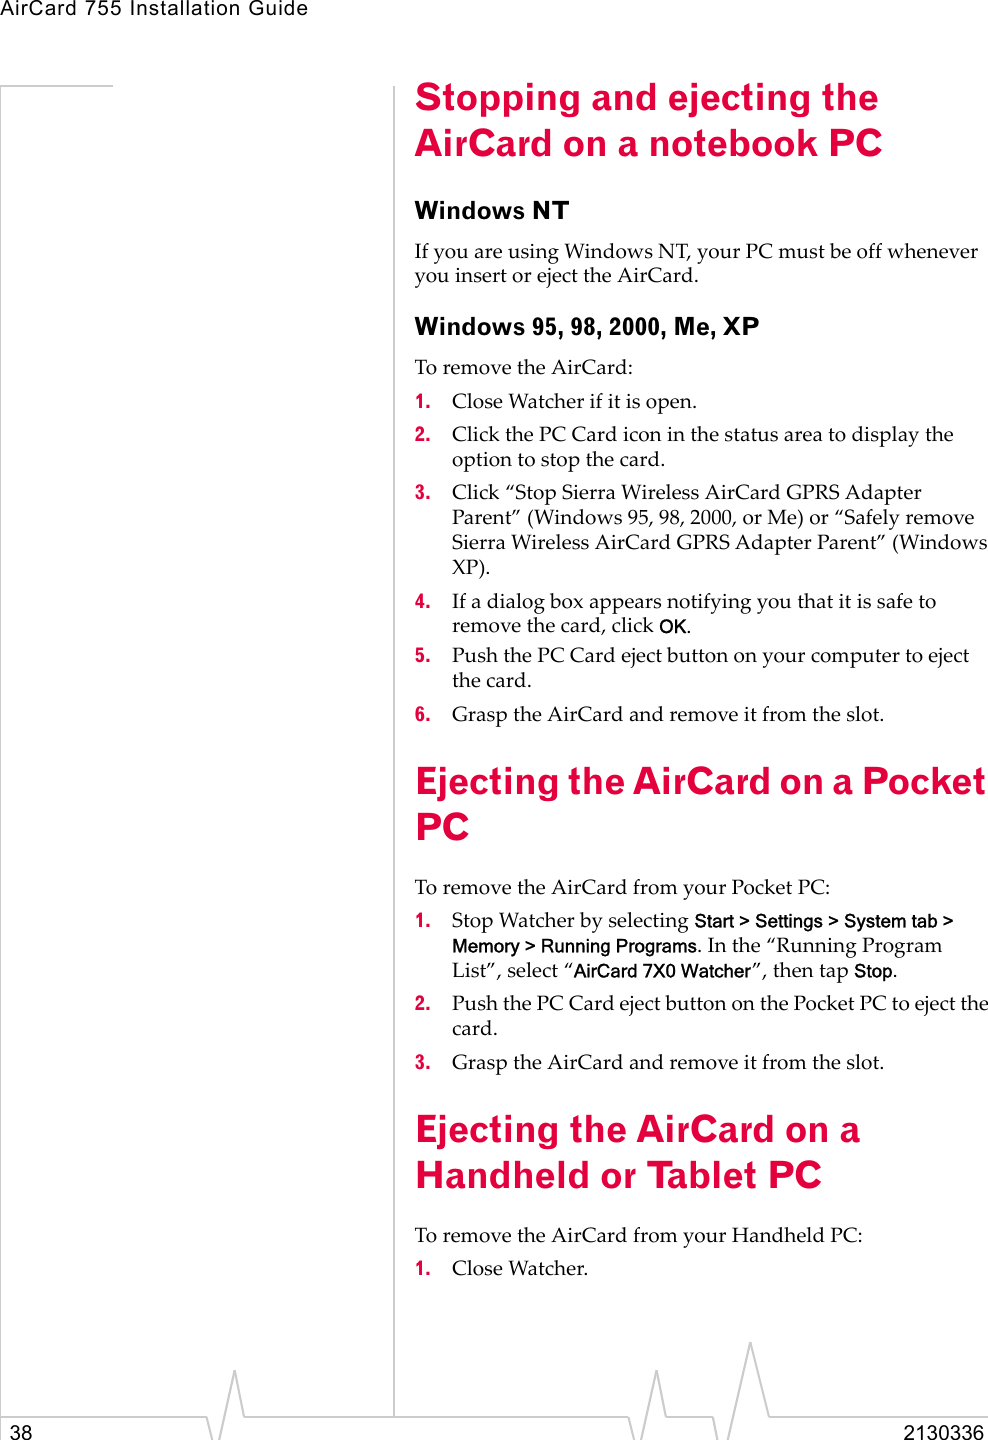 AirCard 755 Installation Guide38 2130336Stopping and ejecting the AirCard on a notebook PCWindows NTIf you are using Windows NT, your PC must be off whenever you insert or eject the AirCard.Windows 95, 98, 2000, Me, XPTo remove the AirCard:1. Close Watcher if it is open.2. Click the PC Card icon in the status area to display the option to stop the card.3. Click “Stop Sierra Wireless AirCard GPRS Adapter Parent” (Windows 95, 98, 2000, or Me) or “Safely remove Sierra Wireless AirCard GPRS Adapter Parent” (Windows XP).4. If a dialog box appears notifying you that it is safe to remove the card, click OK.5. Push the PC Card eject button on your computer to eject the card.6. Grasp the AirCard and remove it from the slot.Ejecting the AirCard on a Pocket PC To remove the AirCard from your Pocket PC:1. Stop Watcher by selecting Start &gt; Settings &gt; System tab &gt; Memory &gt; Running Programs. In the “Running Program List”, select “AirCard 7X0 Watcher”, then tap Stop.2. Push the PC Card eject button on the Pocket PC to eject the card.3. Grasp the AirCard and remove it from the slot.Ejecting the AirCard on a Handheld or Tablet PCTo remove the AirCard from your Handheld PC:1. Close Watcher.